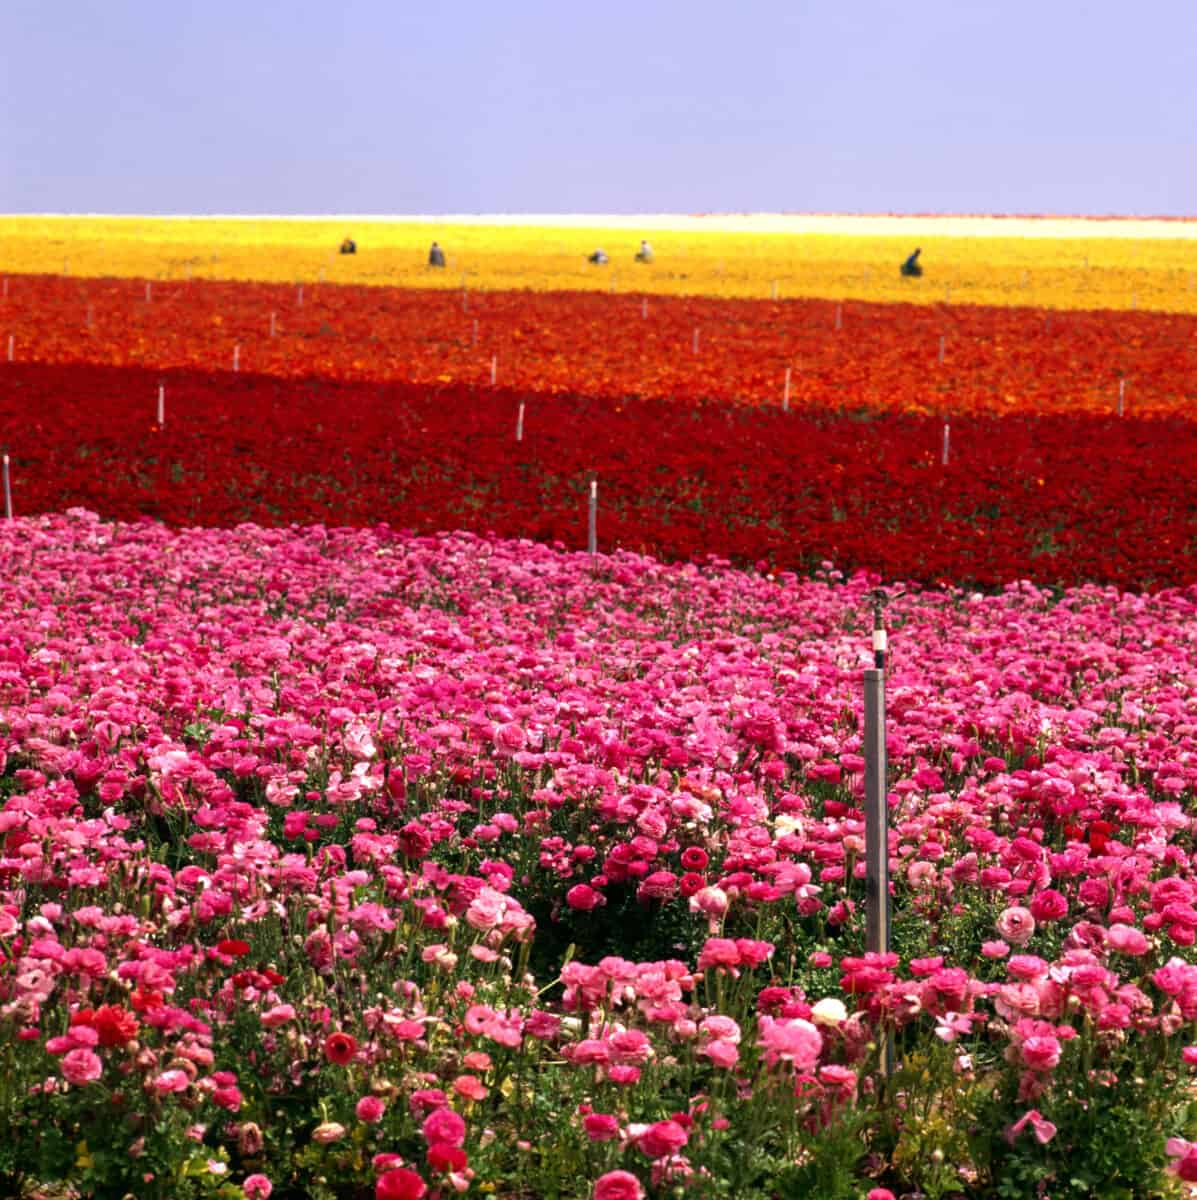 Flower Farm in Carlsbad California. - California Places, Travel, and News.